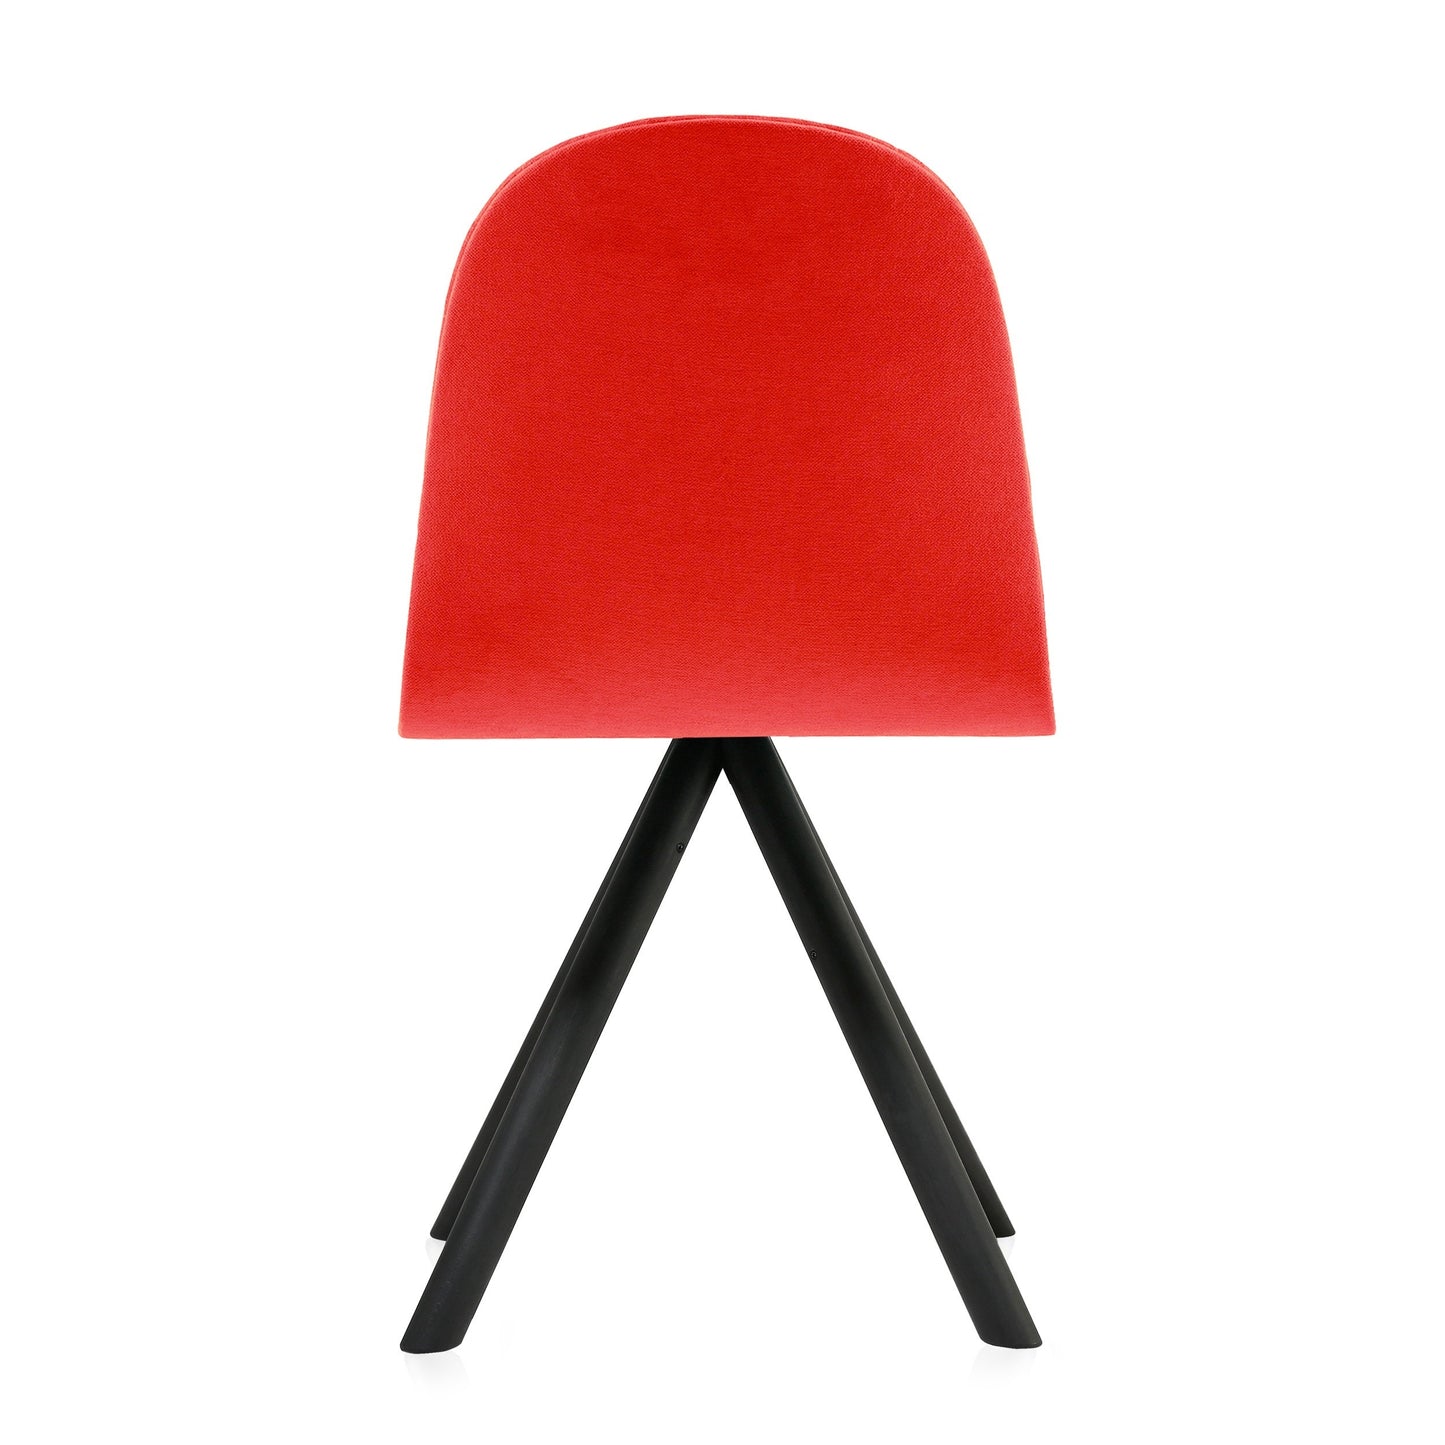 Chair Mannequin 01 black - Red